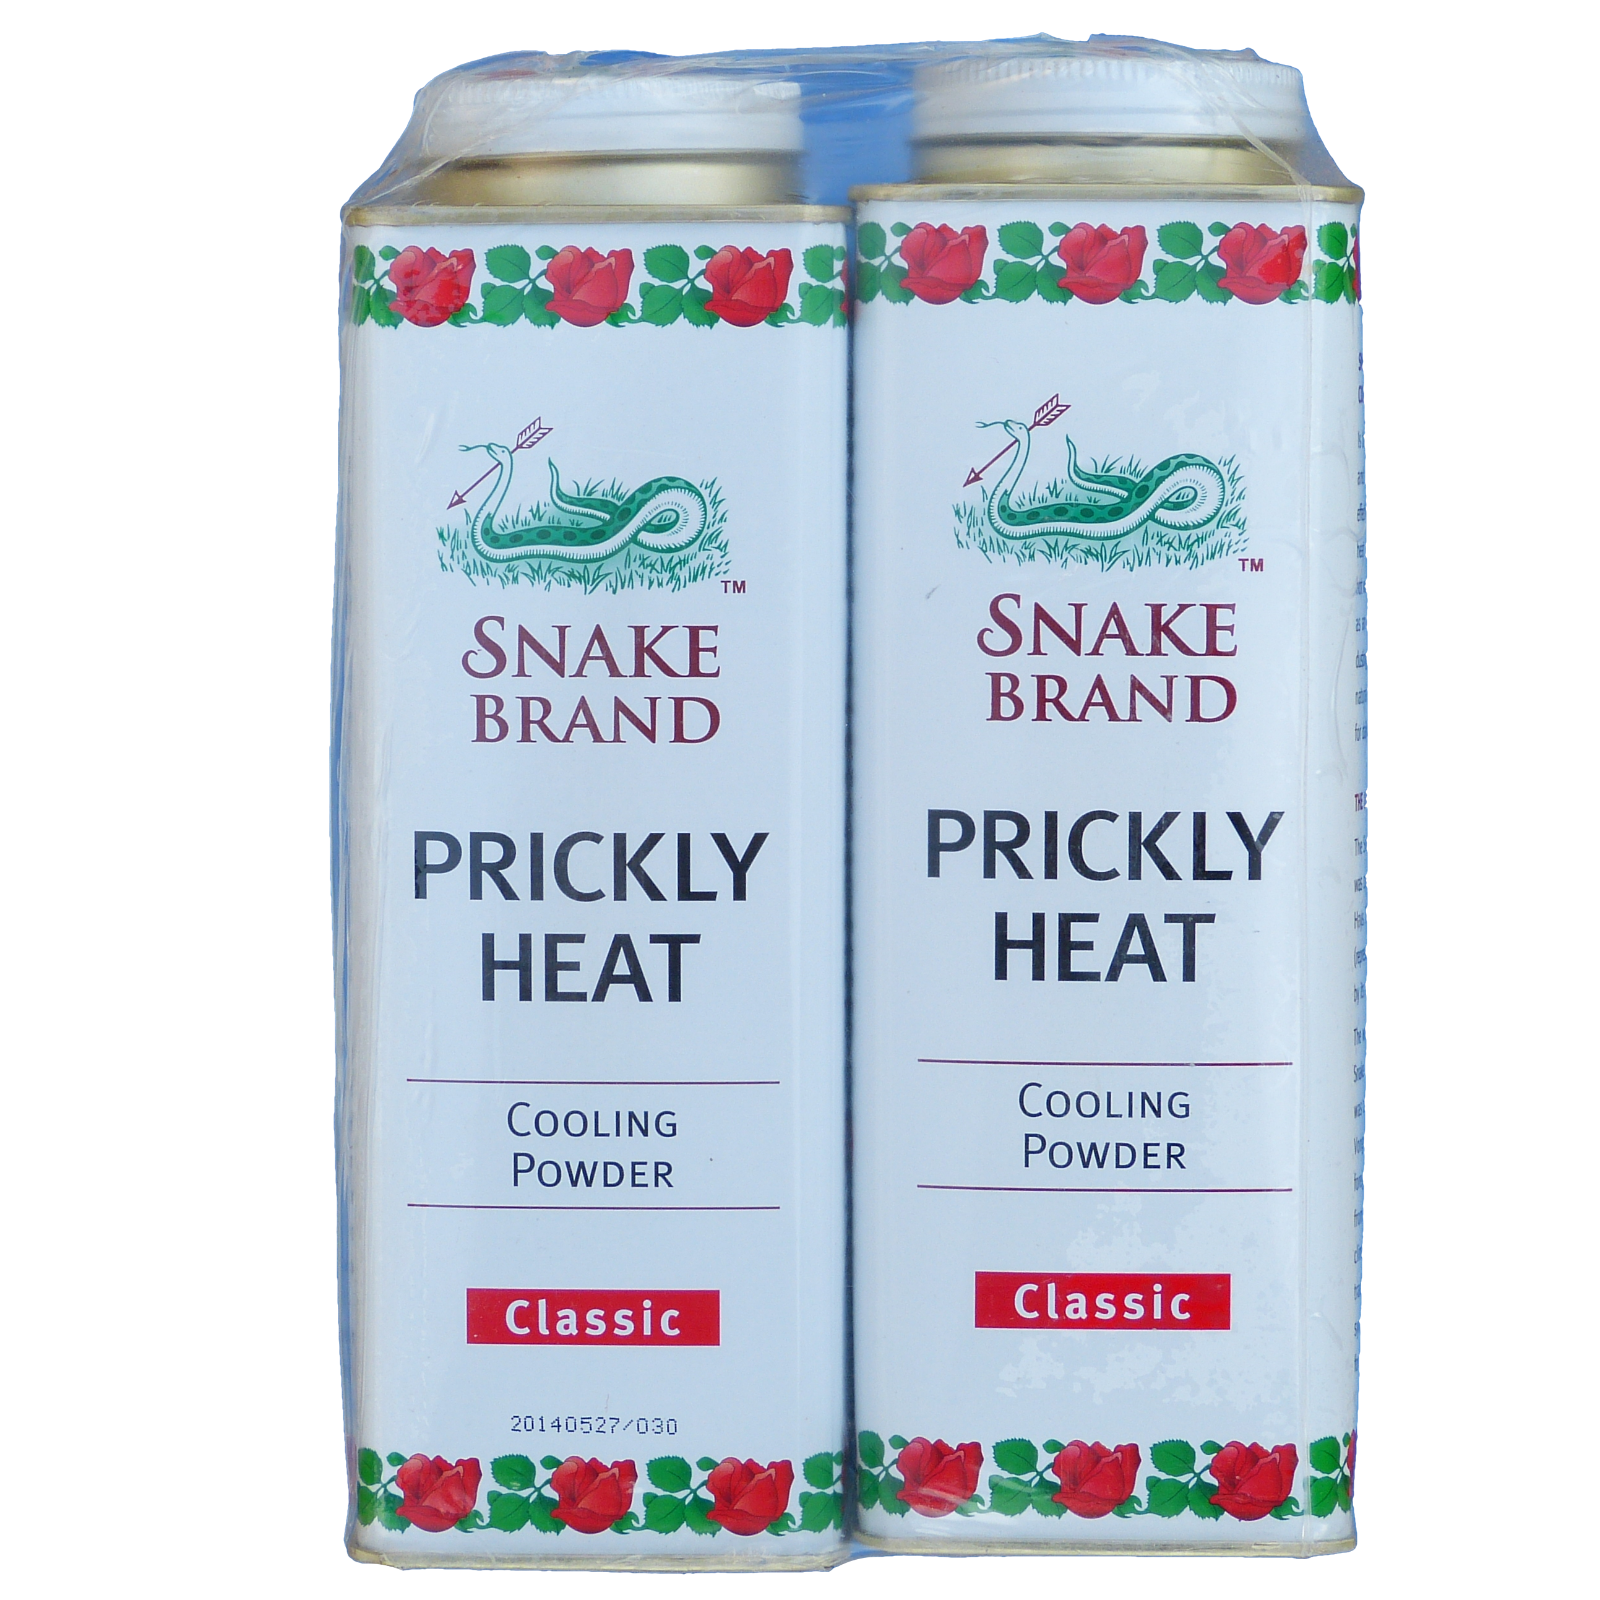 Snake Brand Prickly Heat Cooling Body Powder CLASSIC 280 grams Pack of 2 - $45.00